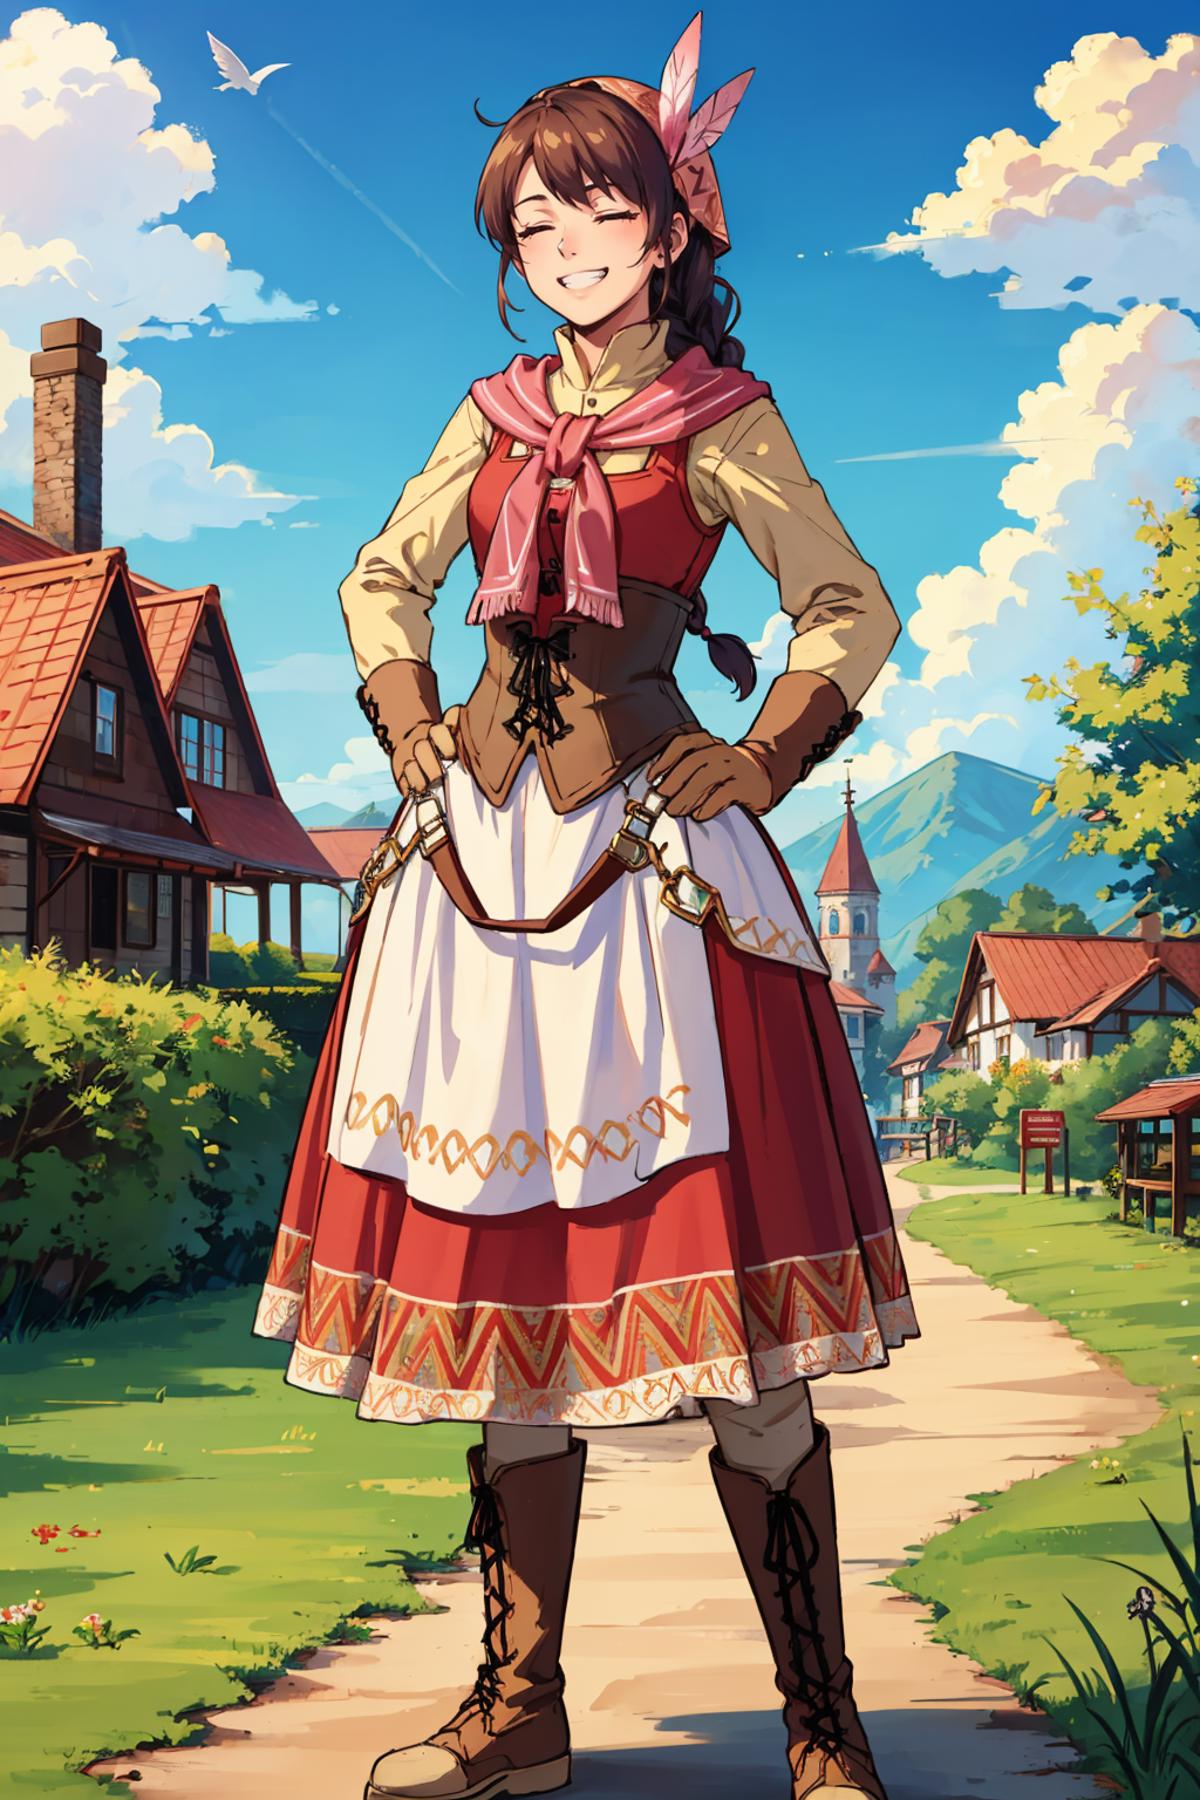 Anime character in a red dress with a scarf, posing in a village setting.